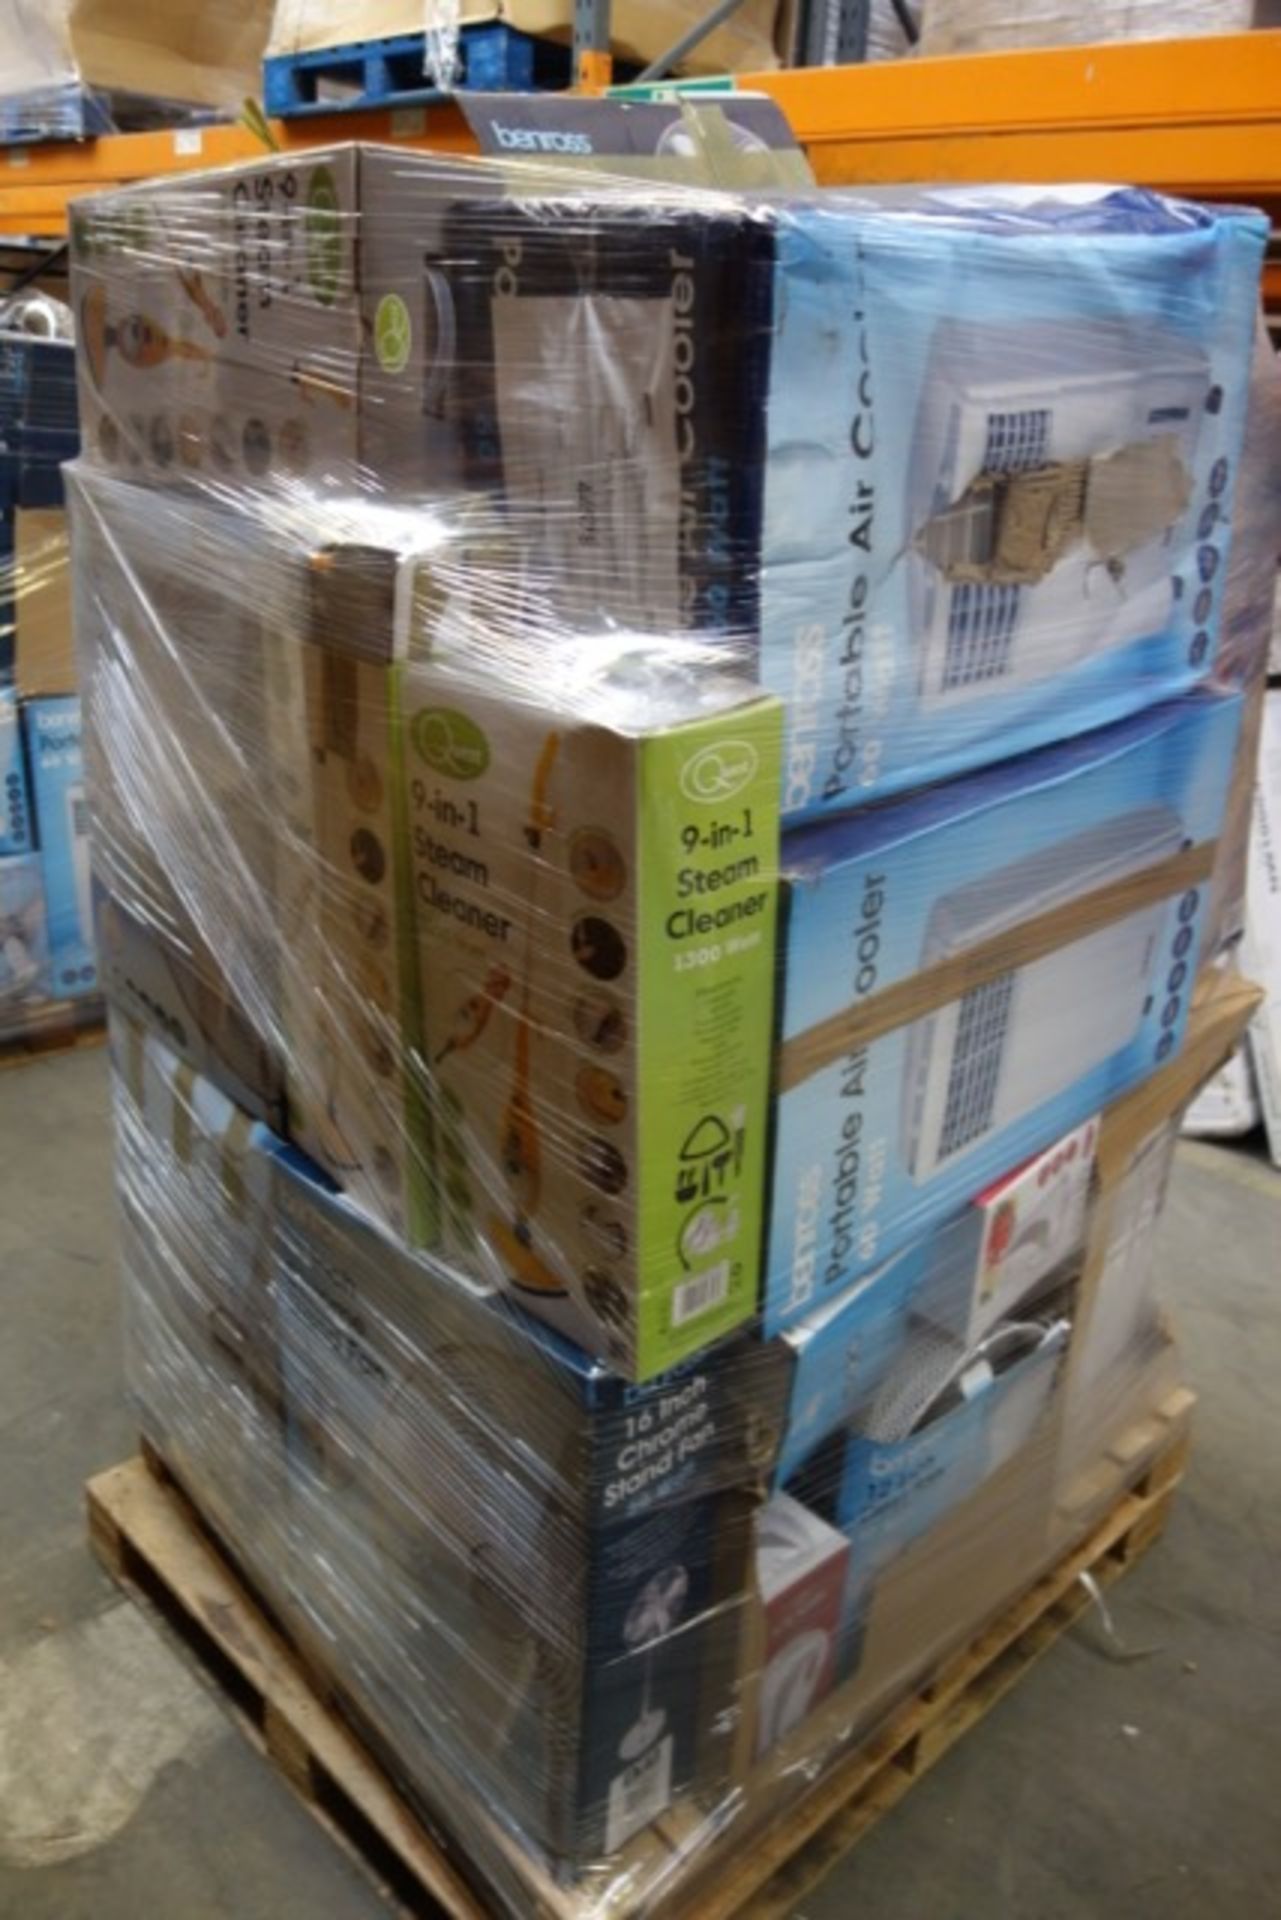 (NR23) PALLET CONTAINING APPROX. 24 x ITEMS INCLUDING: 9 IN 1 STEAM CLEANER, PORTABLE AIR COOLER. - Image 2 of 3